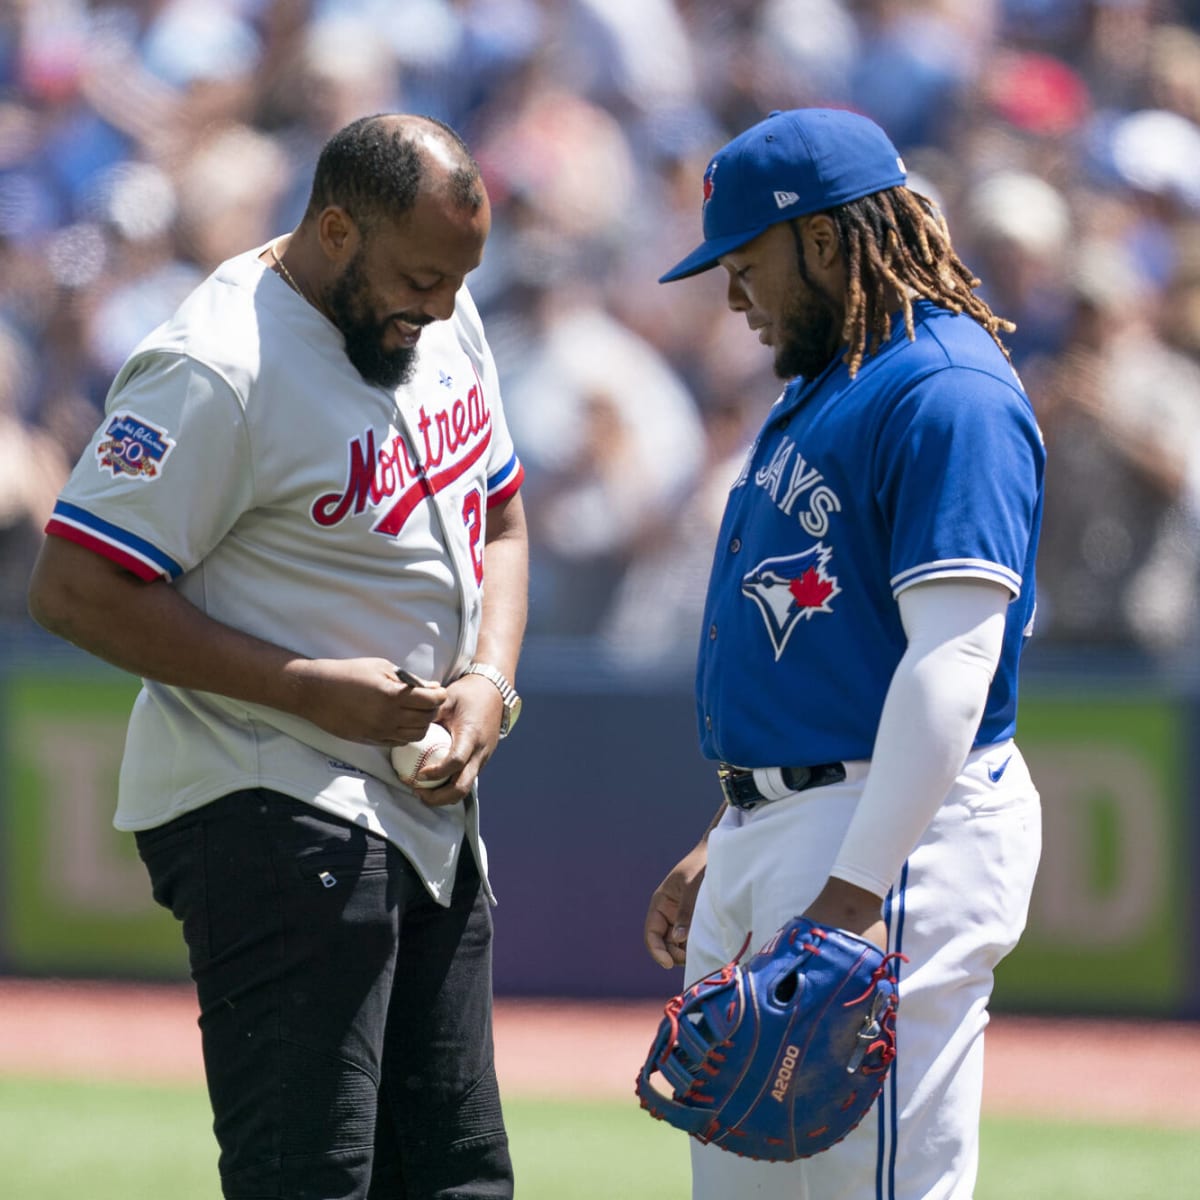 Watch: Vladimir Guerrero Jr. and father combine for first pitch